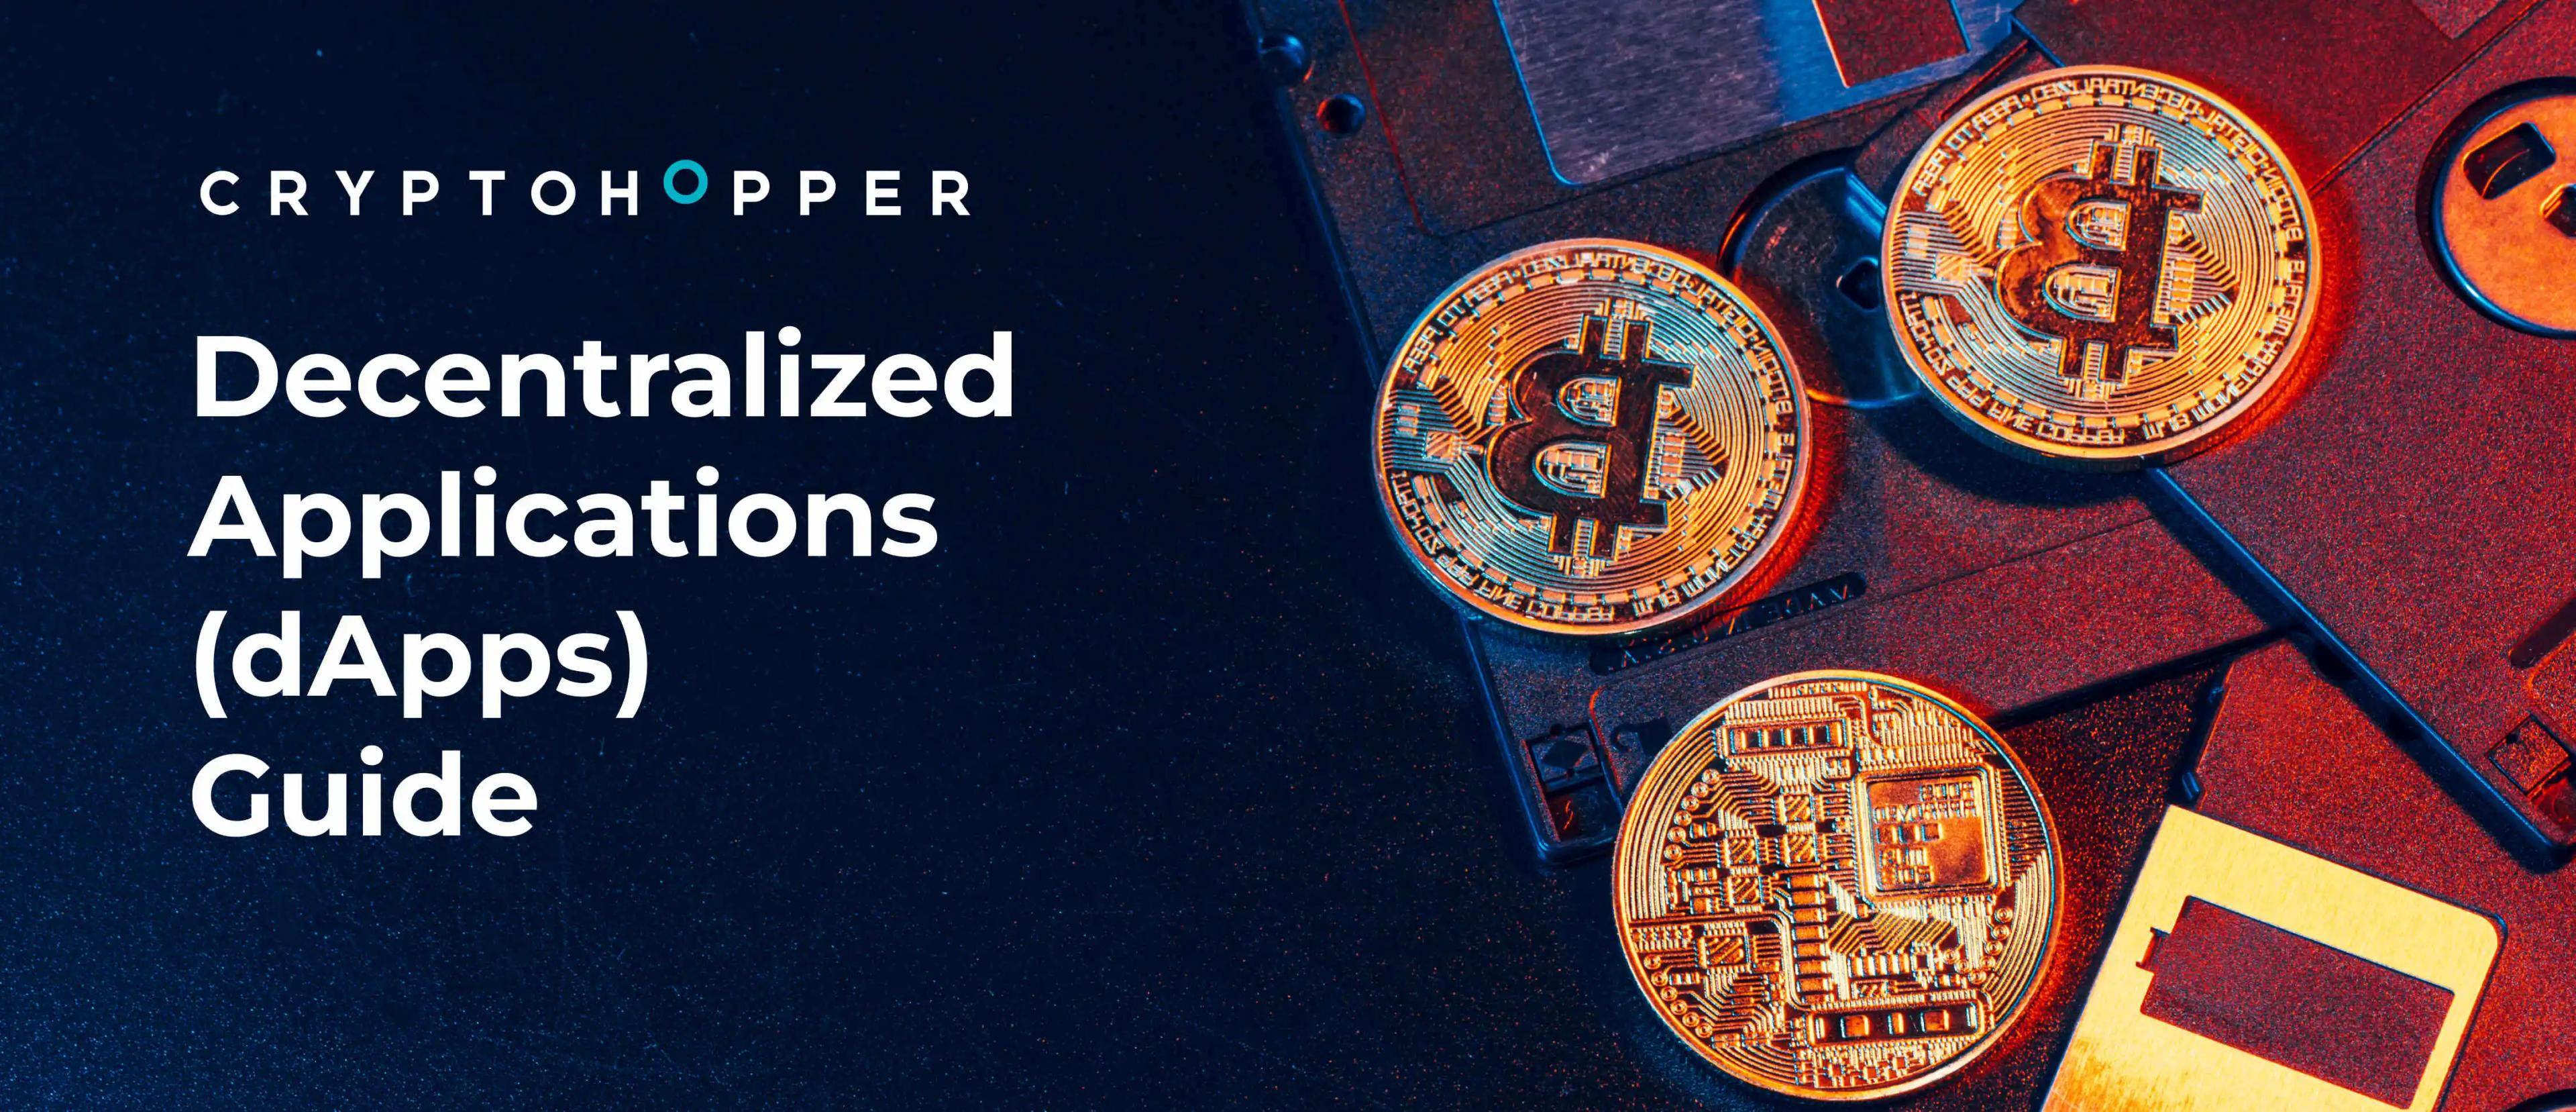 Decentralized Applications (dApps) Guide